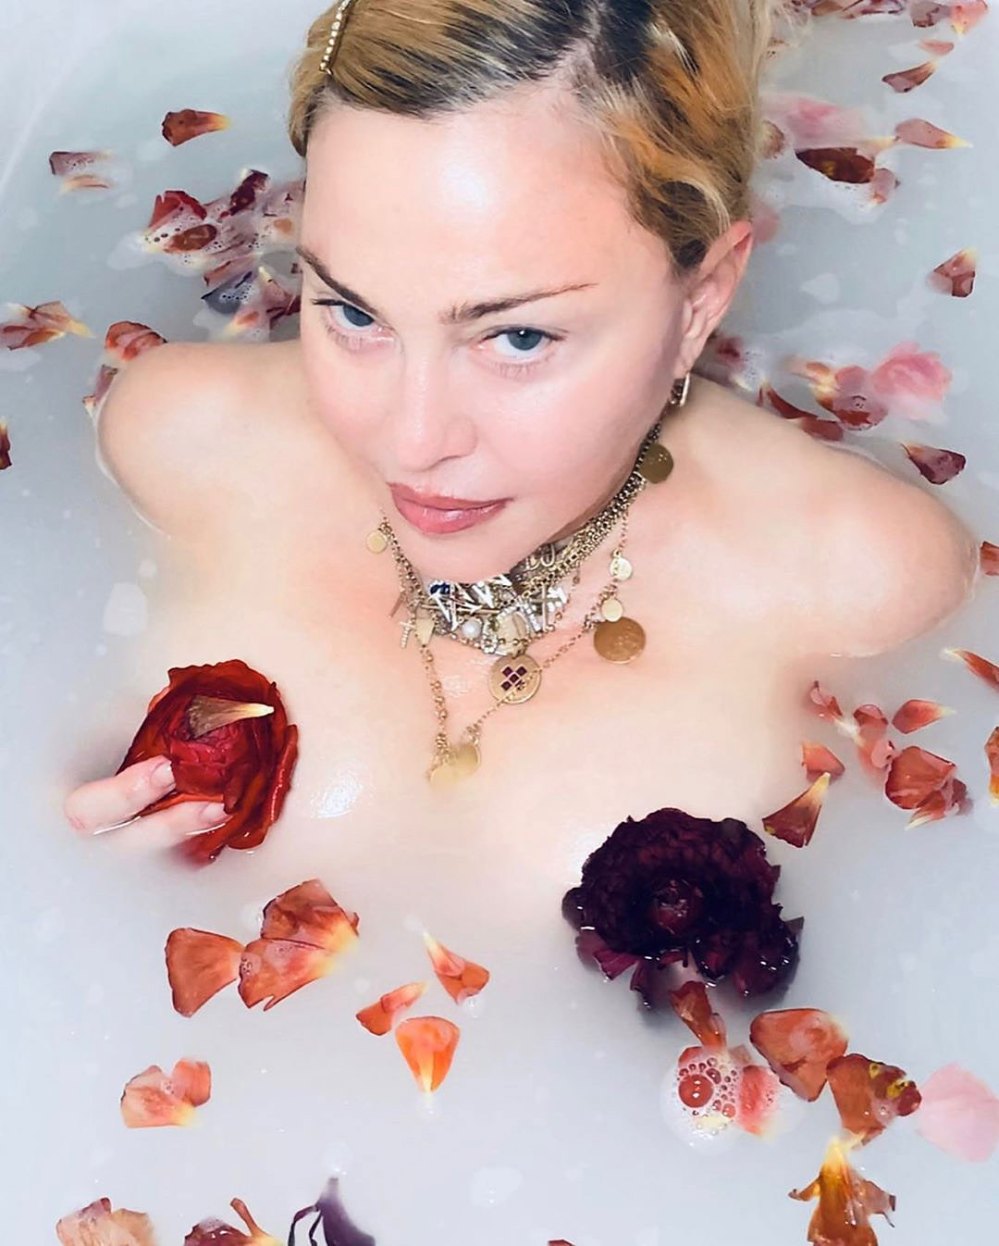 Madonna Receives Backlash After Calling Coronavirus the Greatest Equalizer in Bathtub Video